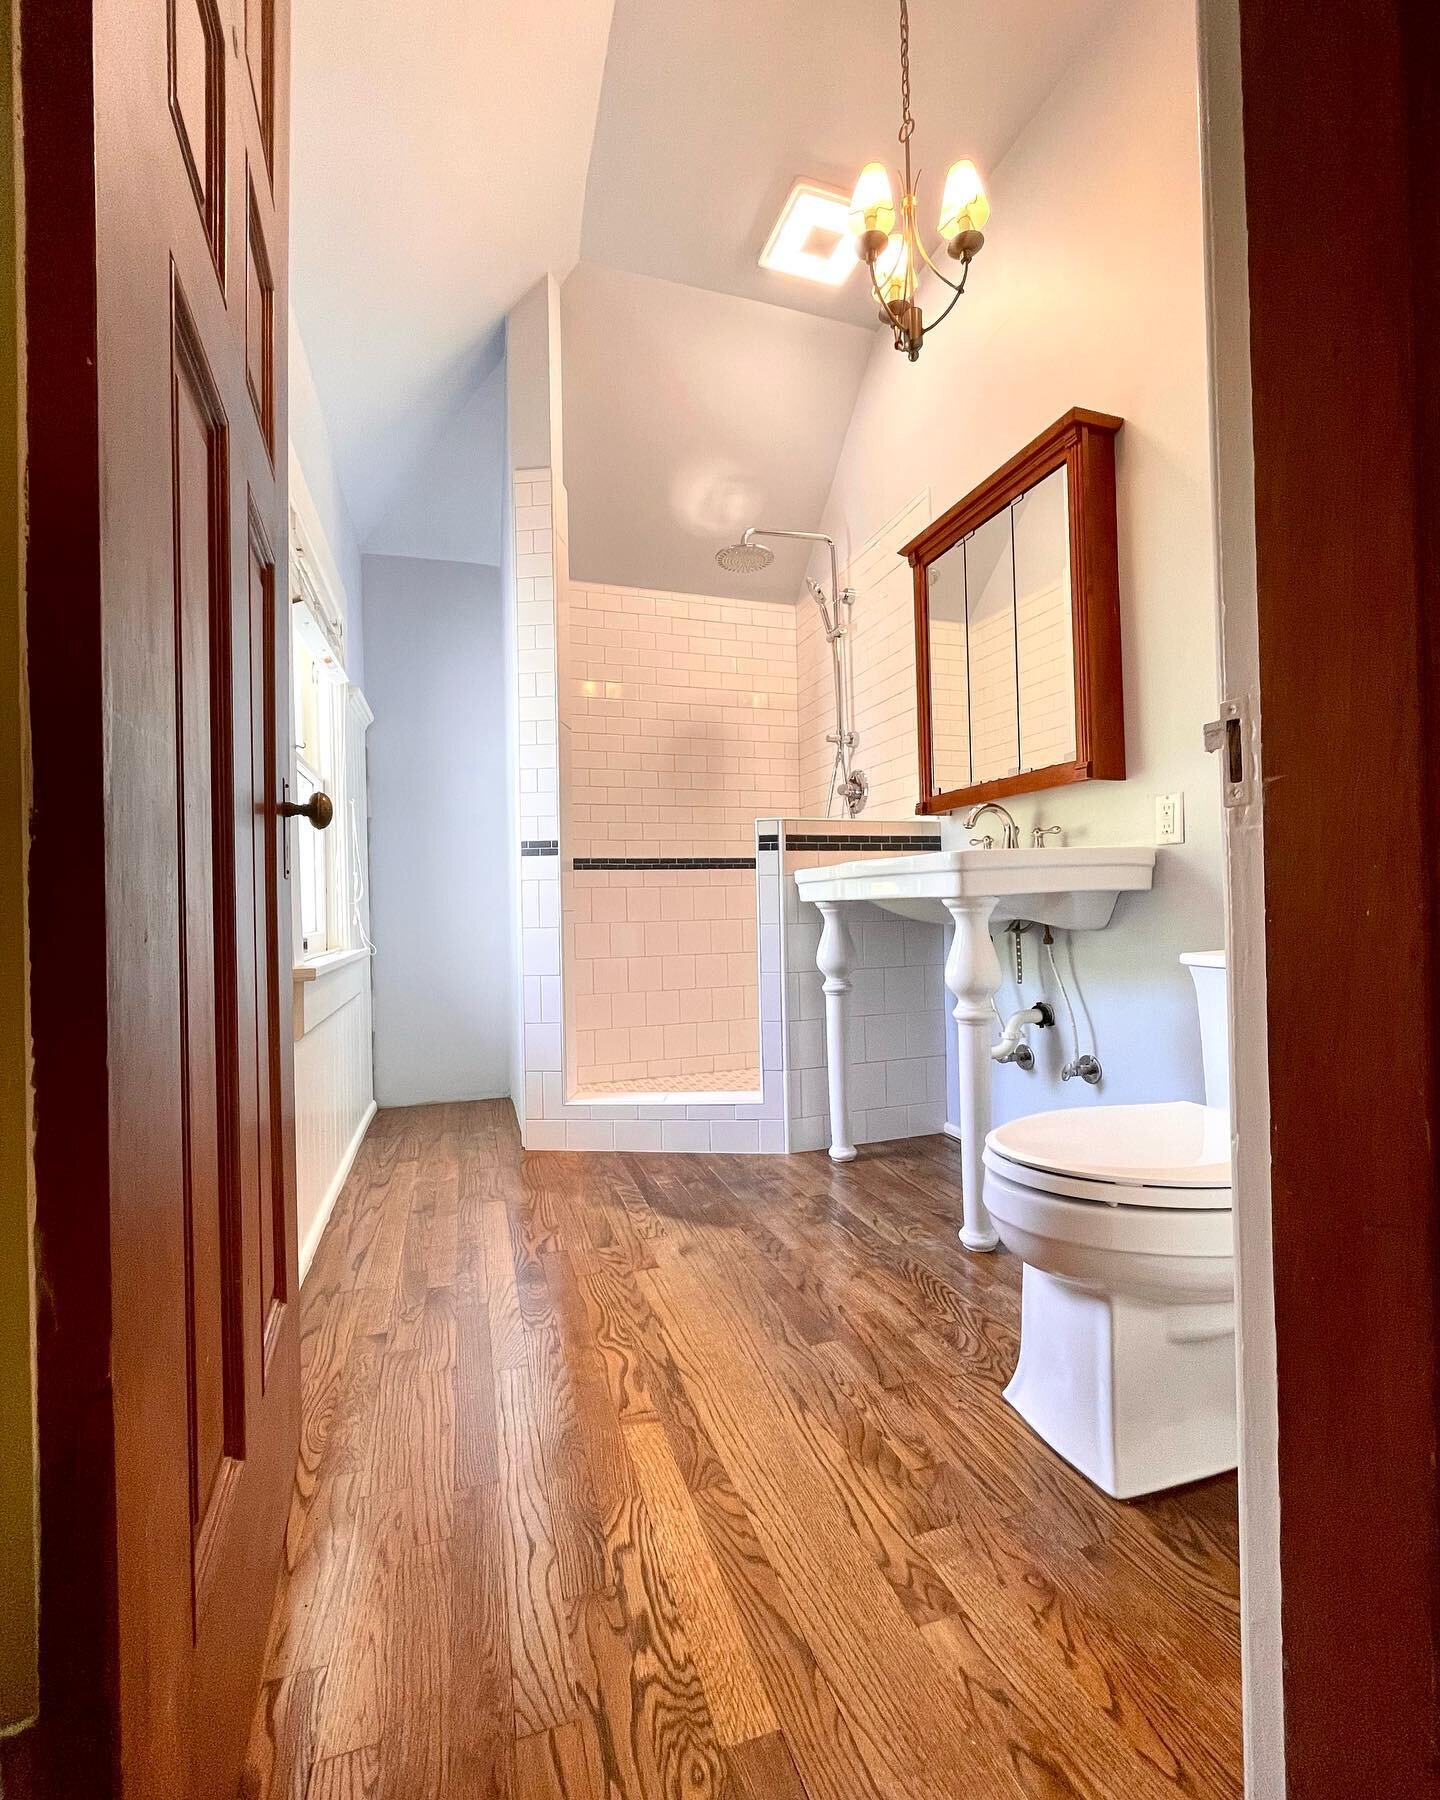 A little update to this historic homes bathroom. We&rsquo;ve slowly been transforming each space in this home to bring it to the present and still uphold some of the historic charm!

Stay tuned for our custom built cabinet/shelf that will fit in betw